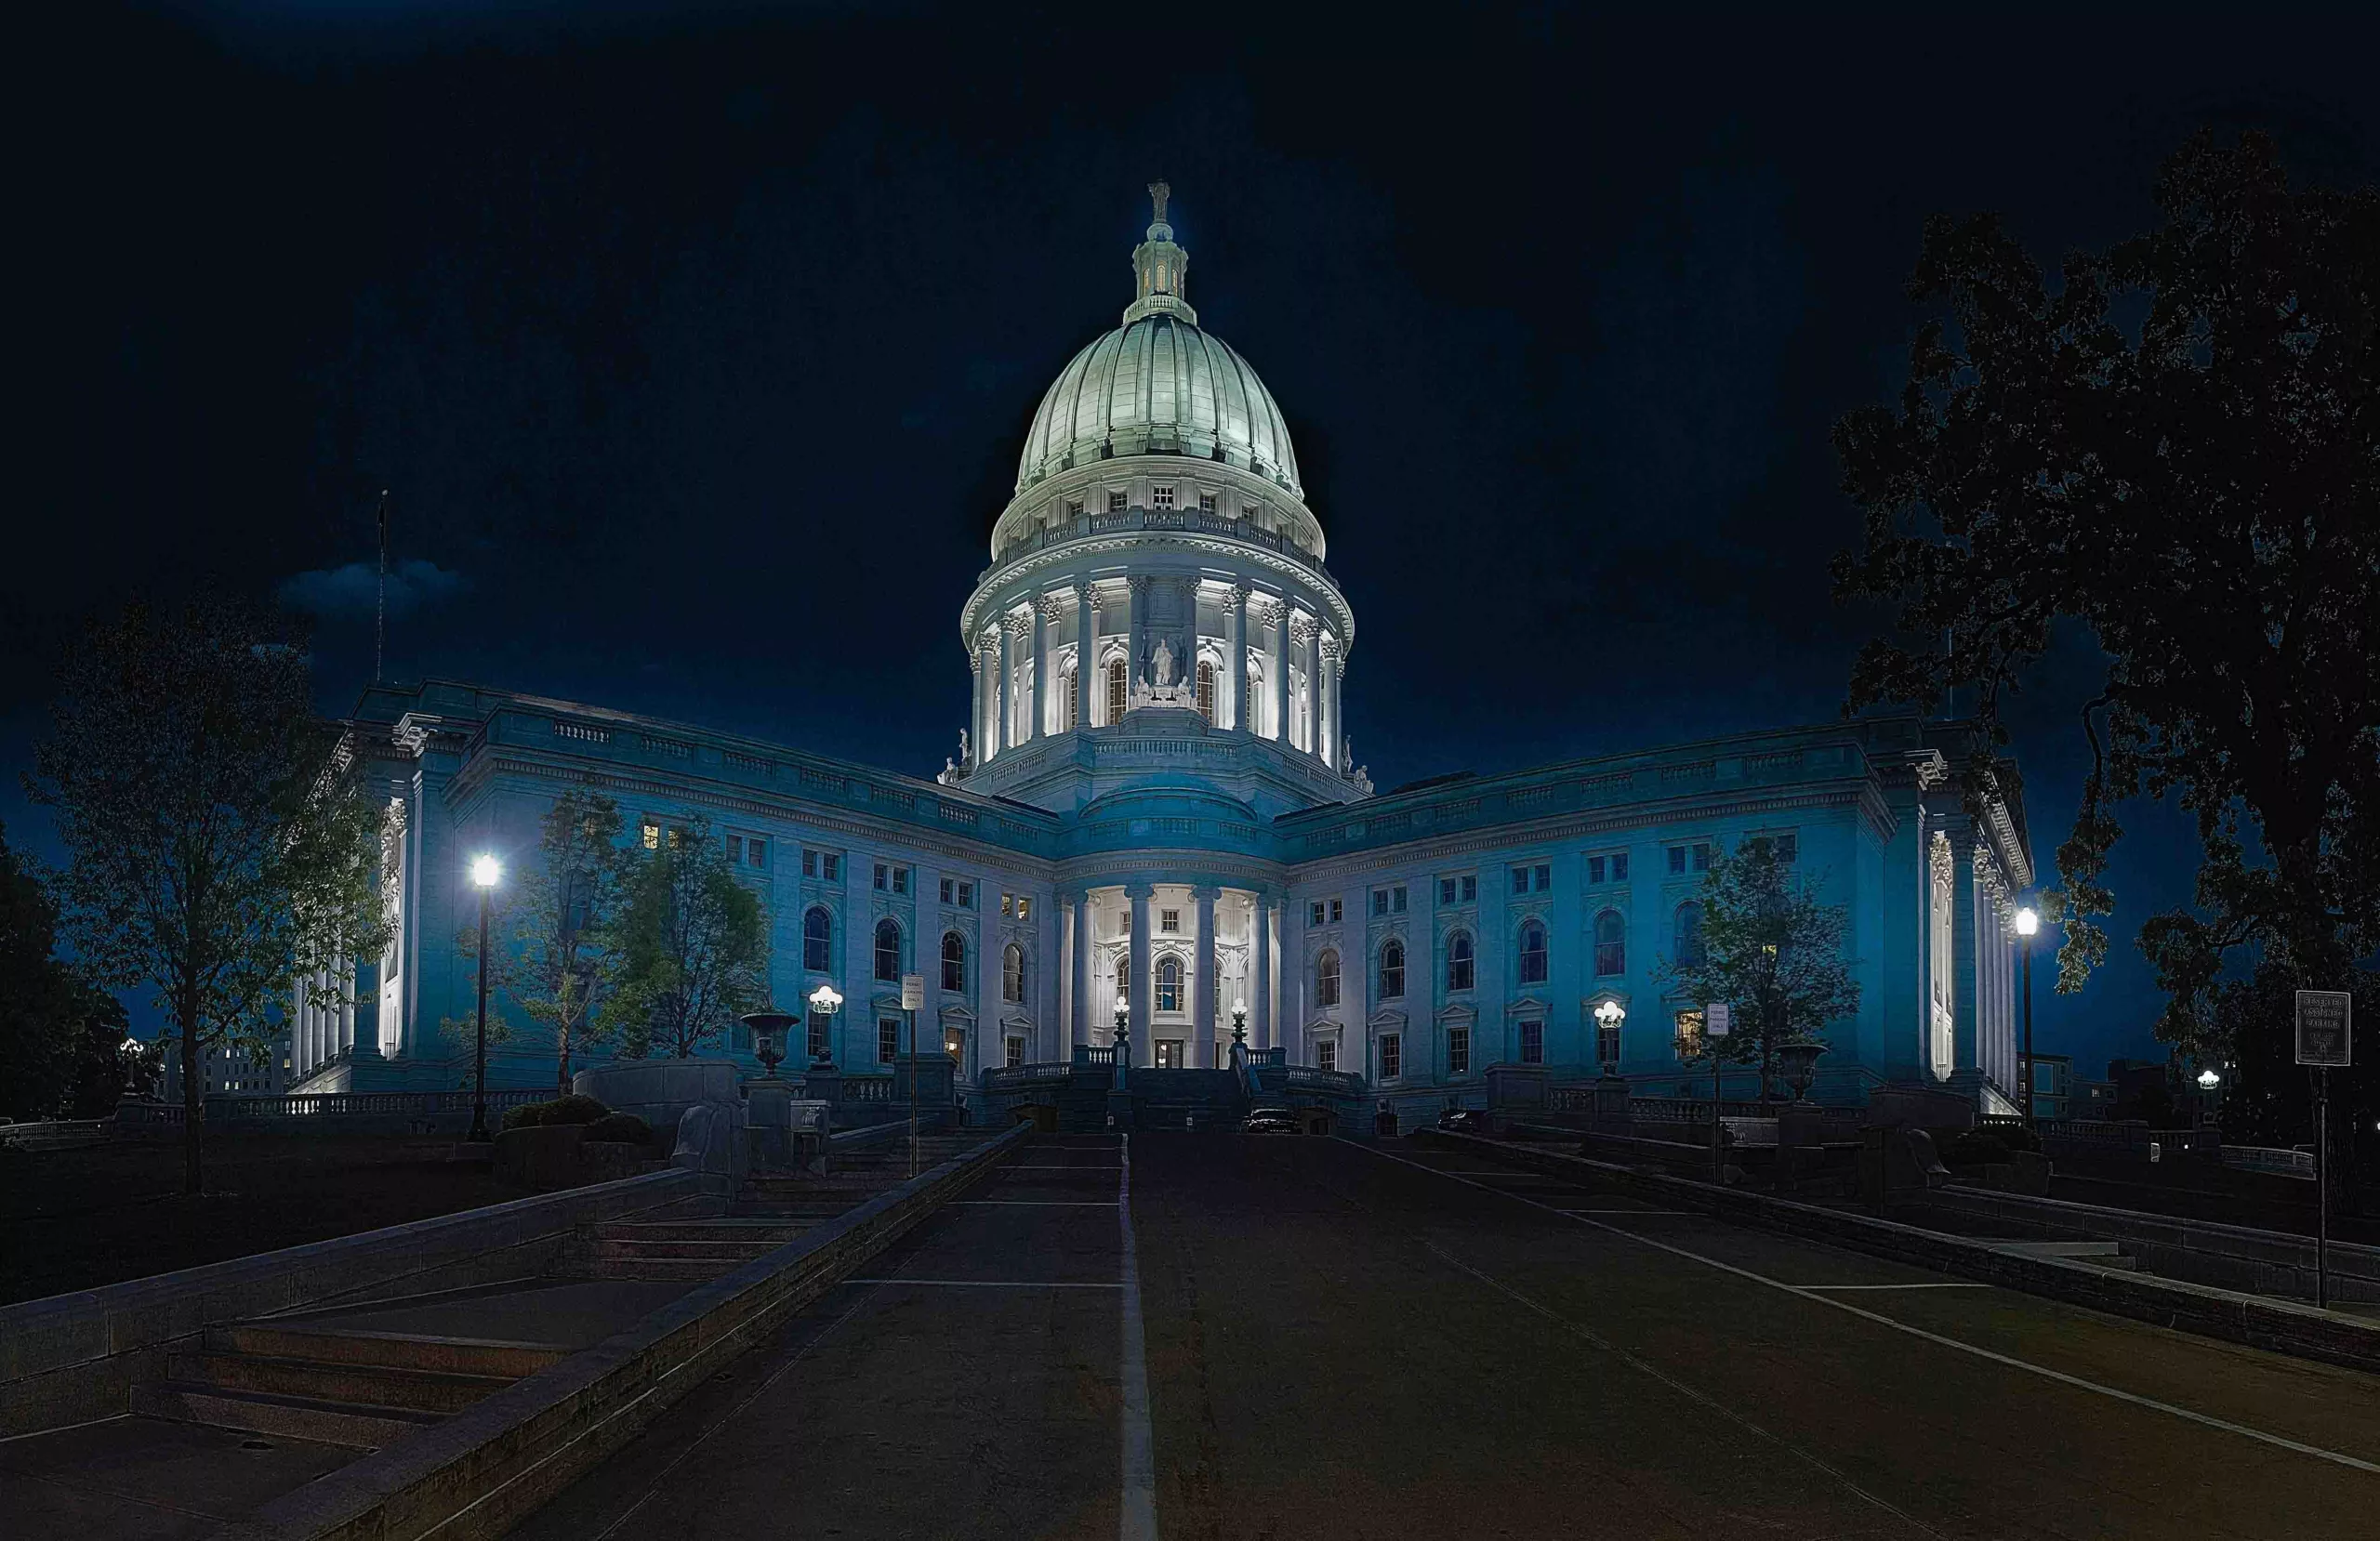 Illuminated capitol building at night with dome and front steps